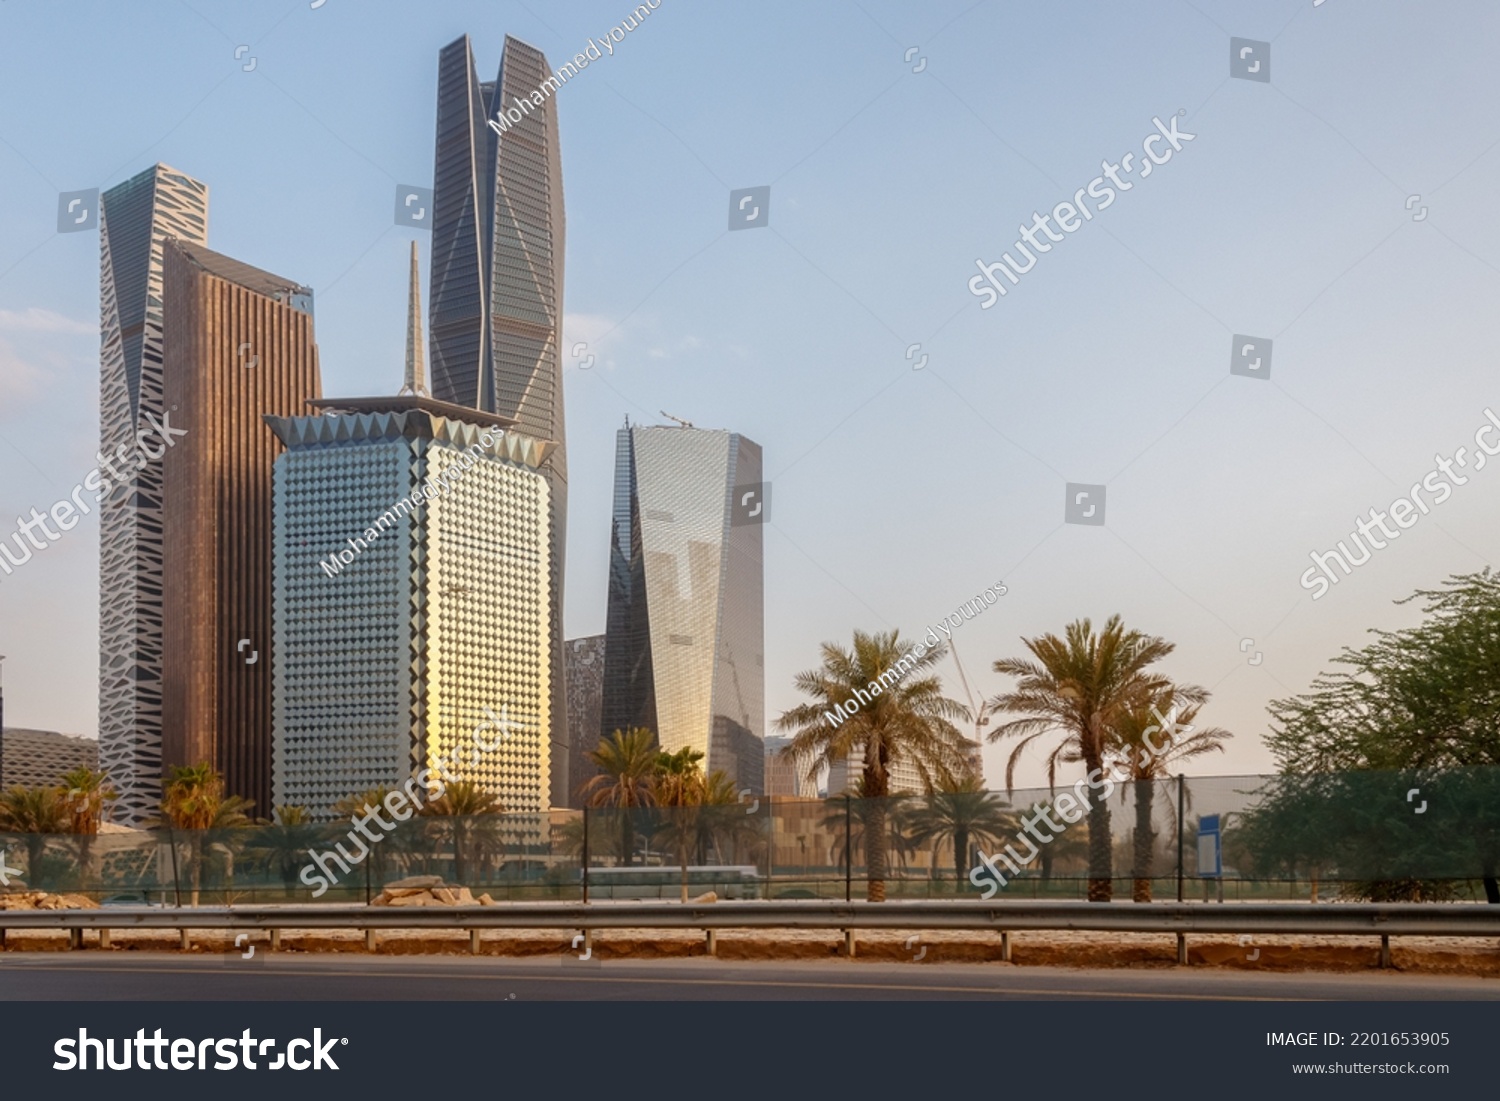 Riyadh roads and streets are filled with ornamental trees on both sides of the road, downtown, Riyadh skyline, King Abdullah Financial District, Saudi Arabia #2201653905